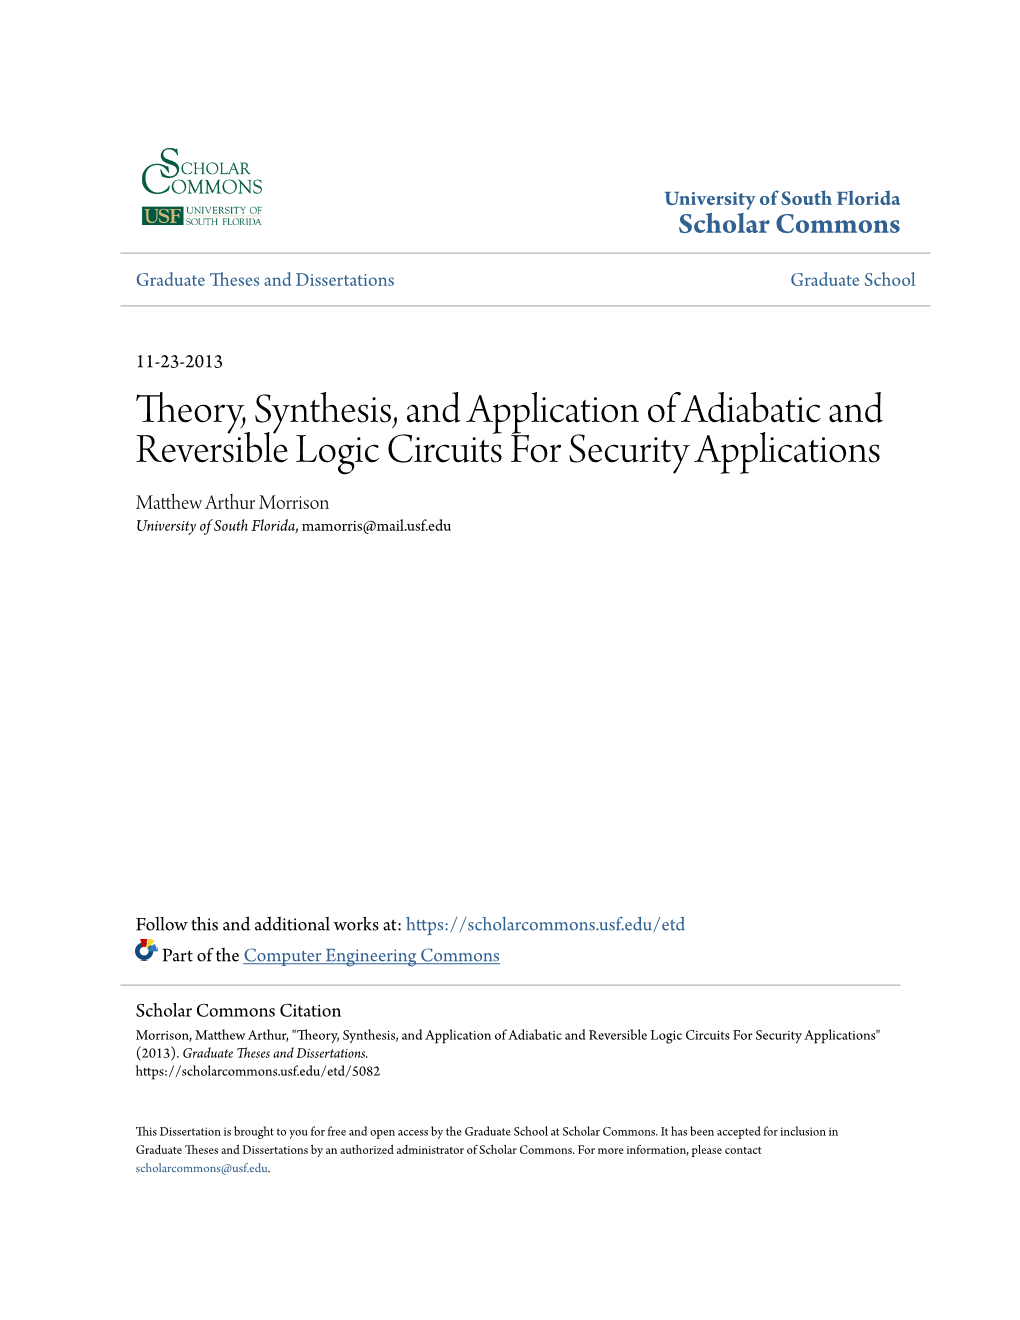 Theory, Synthesis, and Application of Adiabatic and Reversible Logic